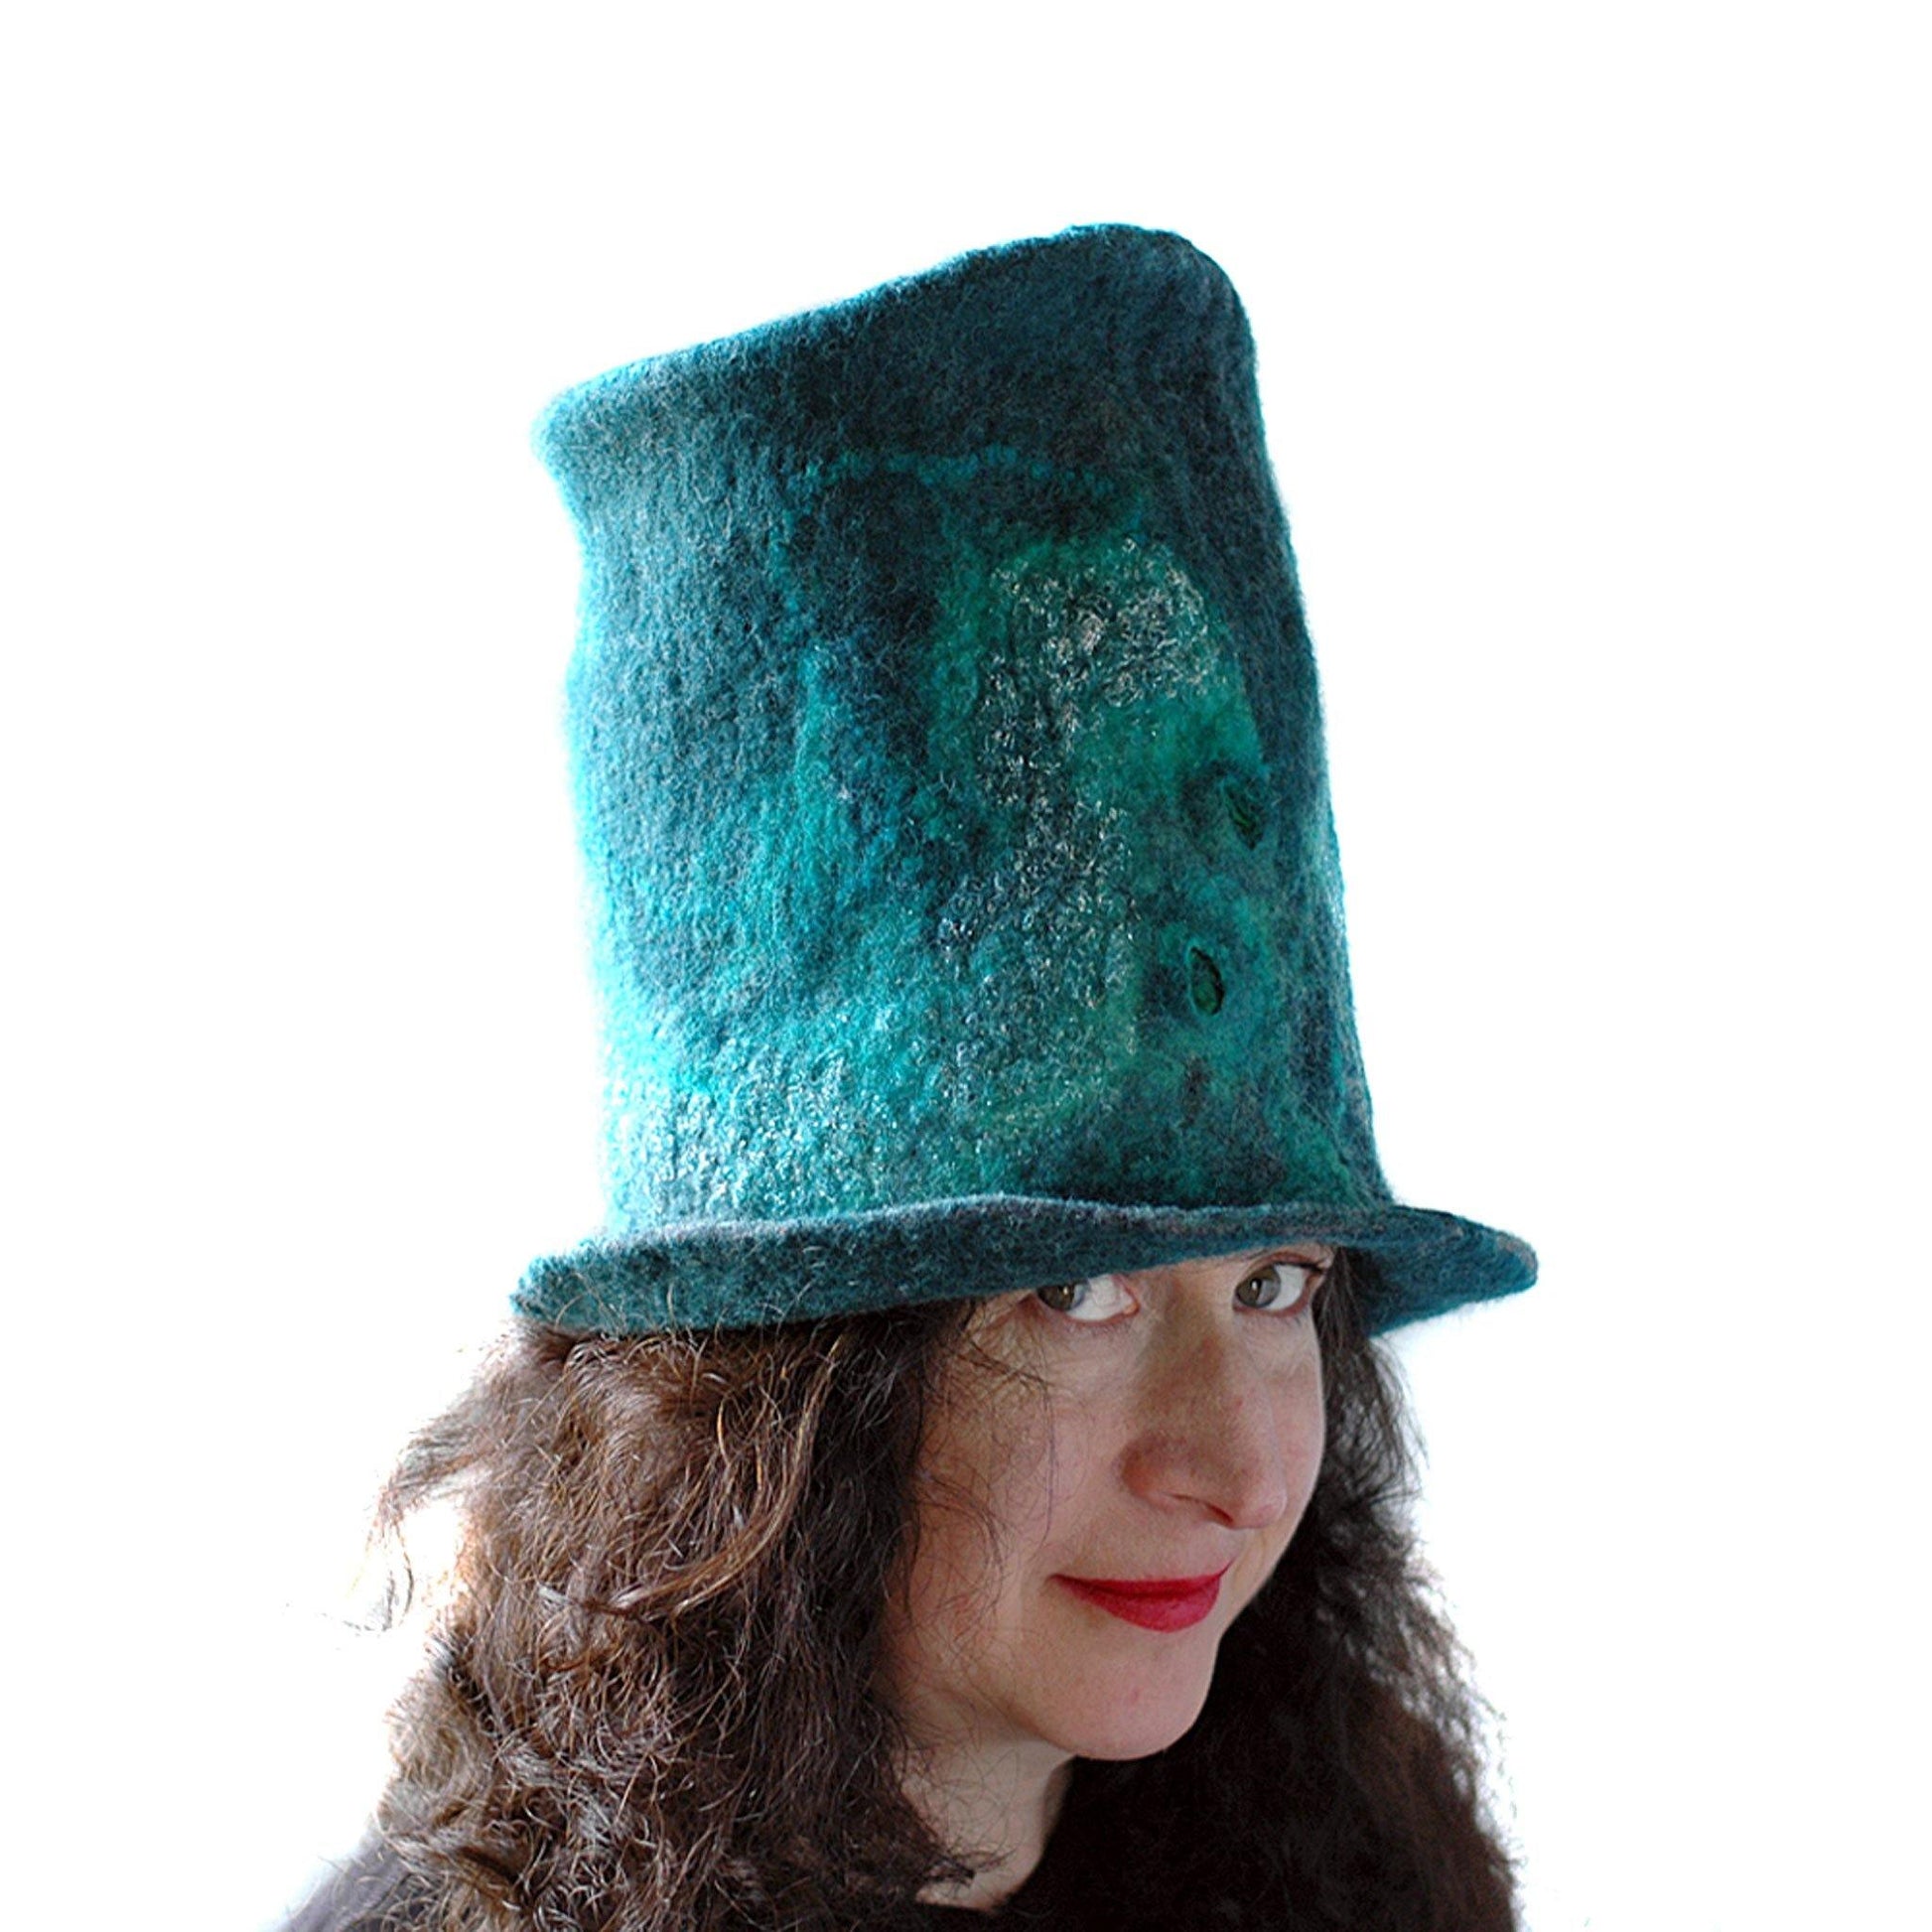 Tall Emerald Green and Silver Top Hat - three quarters view